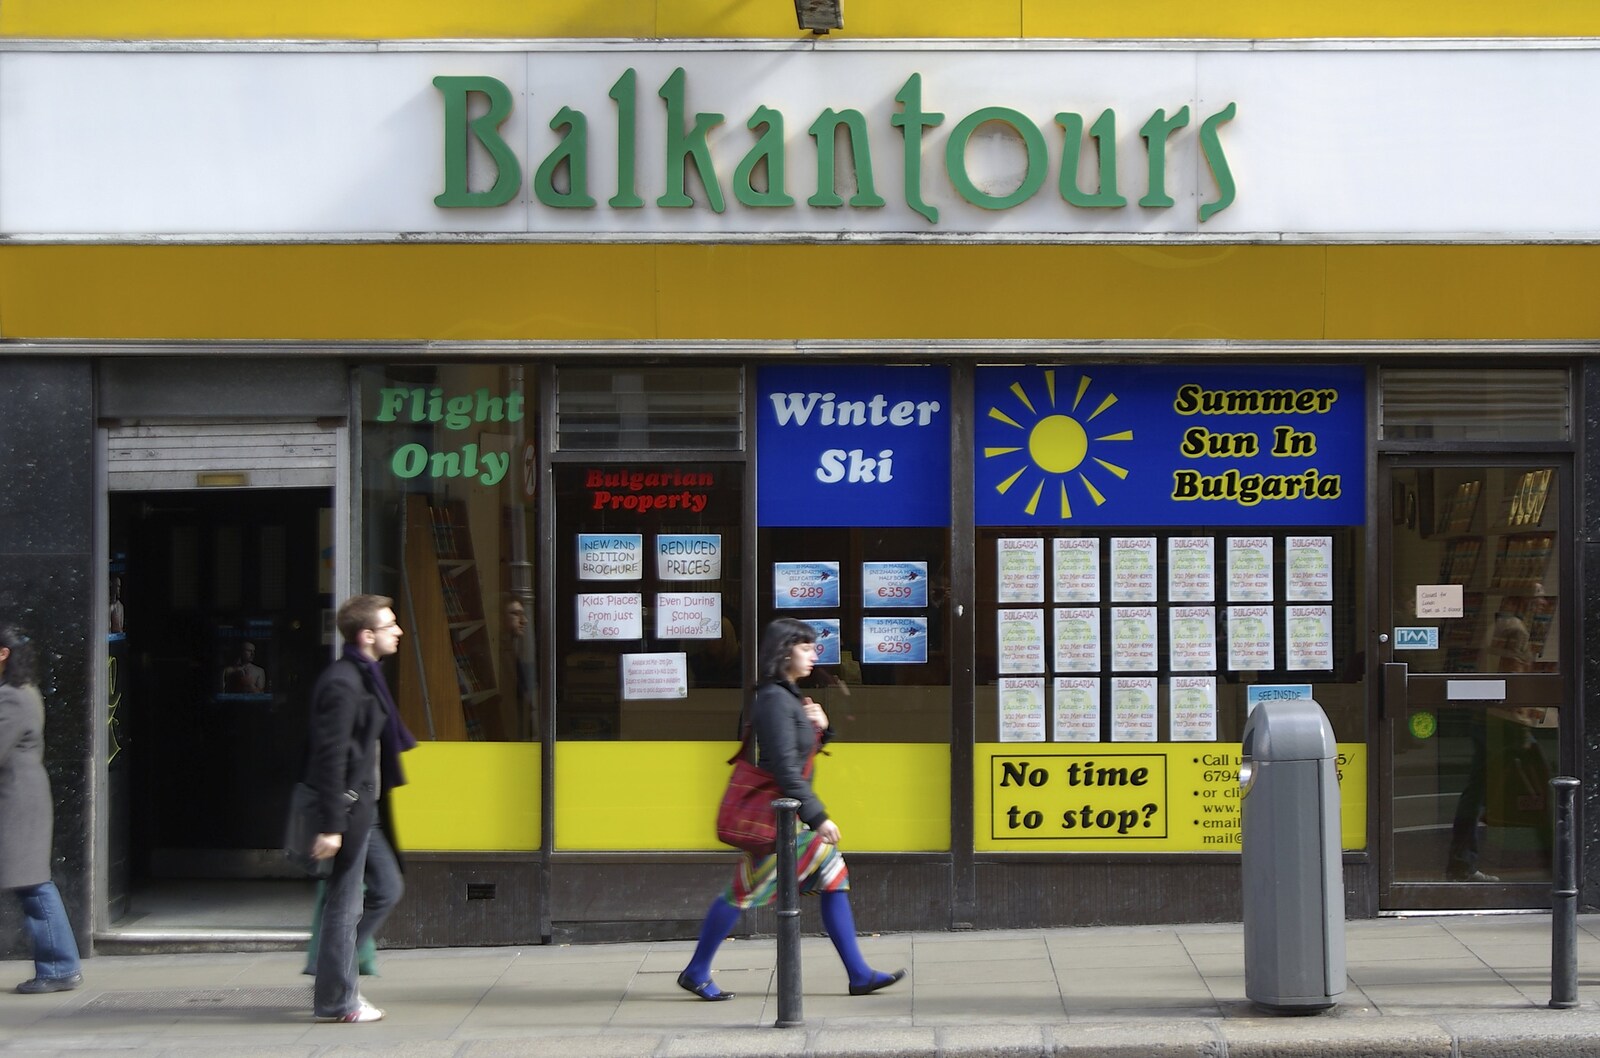 The 'Balkantours' shop isn't really appealing from Easter in Dublin, Ireland - 21st March 2008